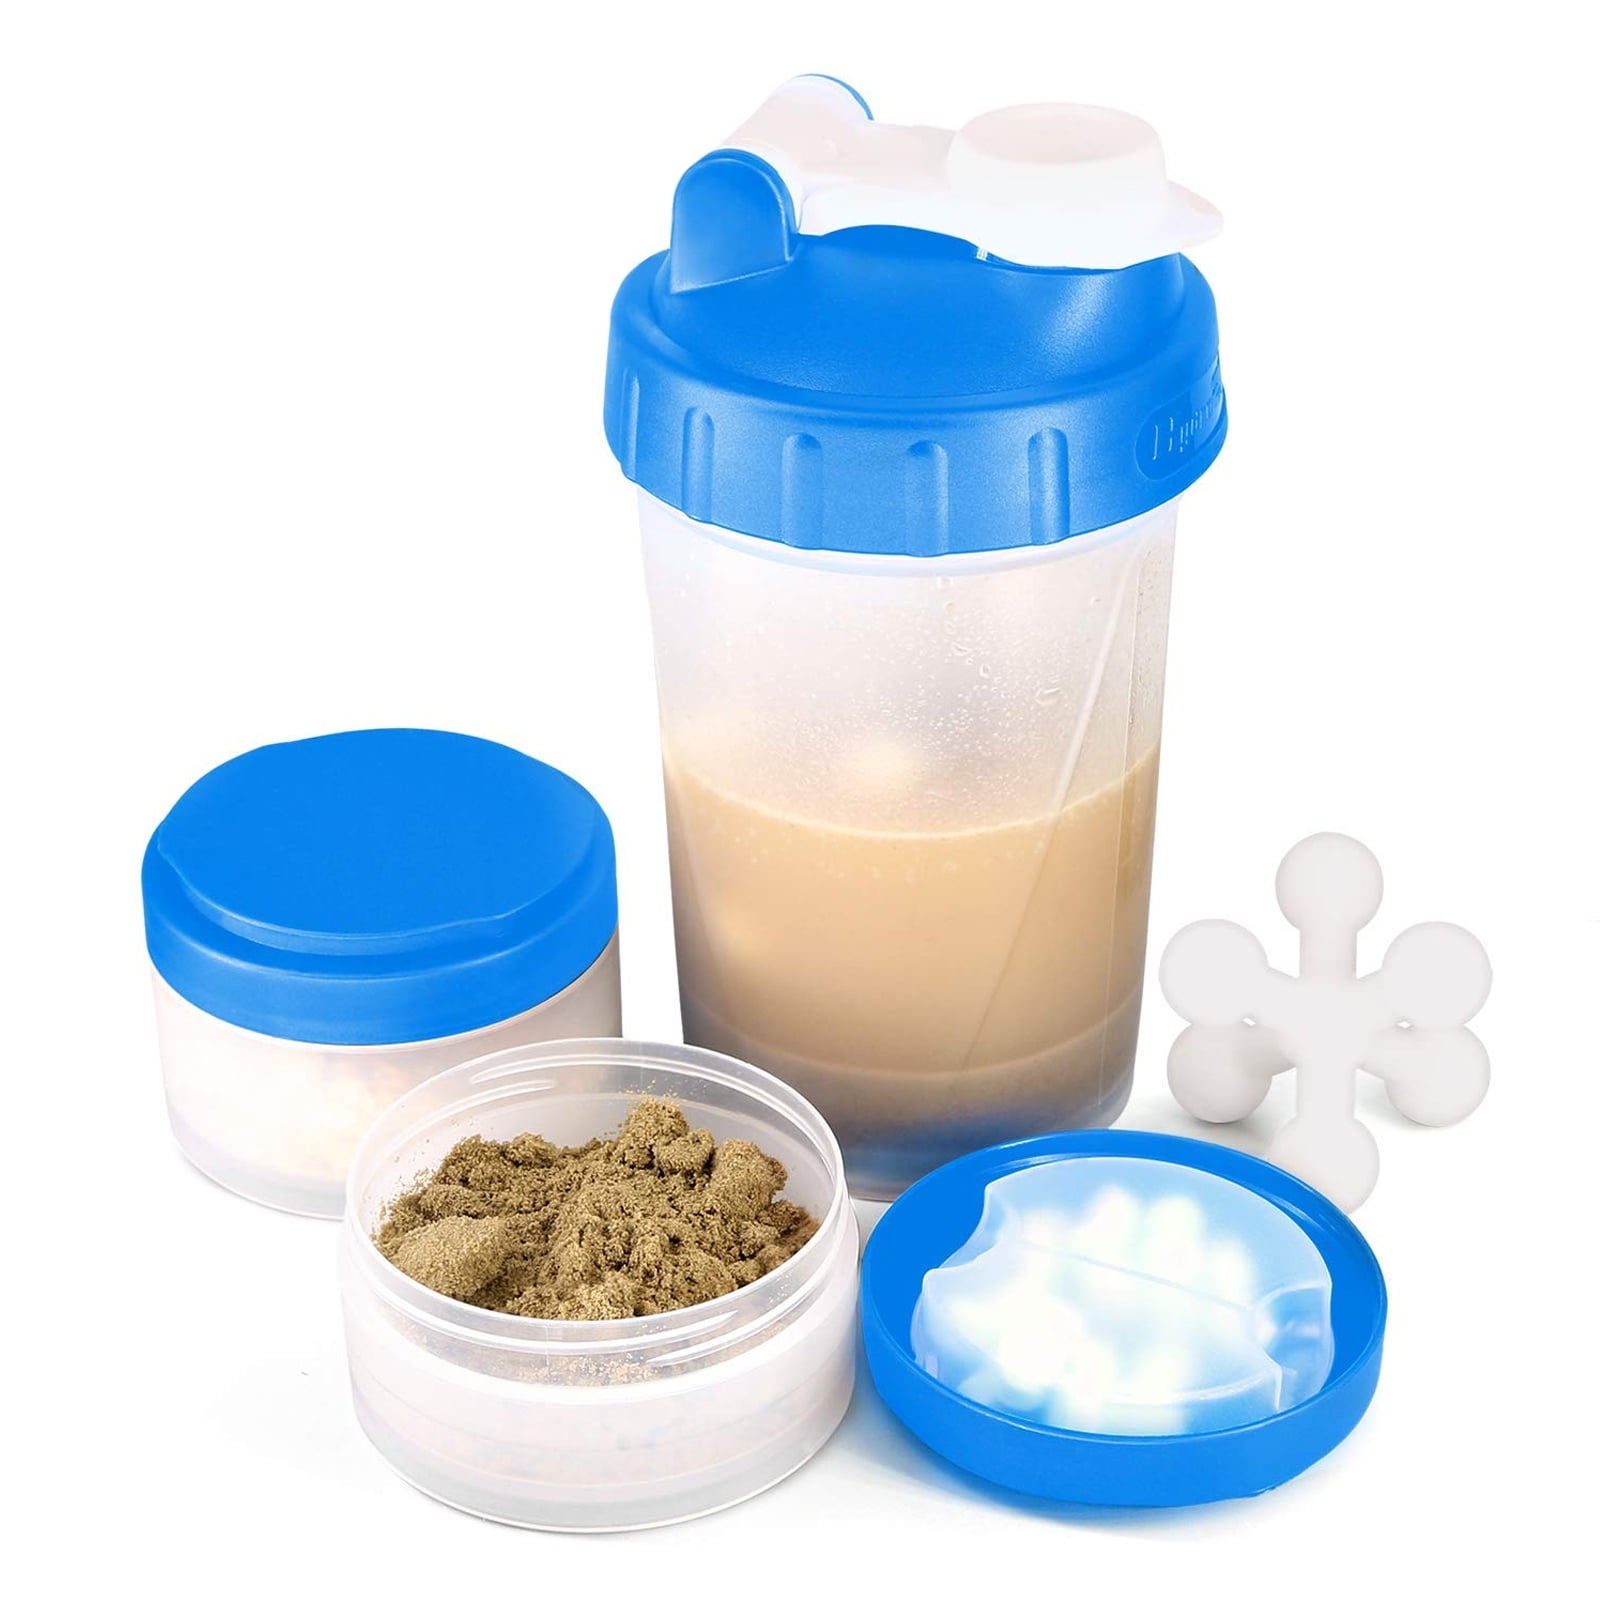 21oz Protein Shaker Bottle with Powder Storage Container-Shaker Cups for  Protein Shakes-pre workout …See more 21oz Protein Shaker Bottle with Powder